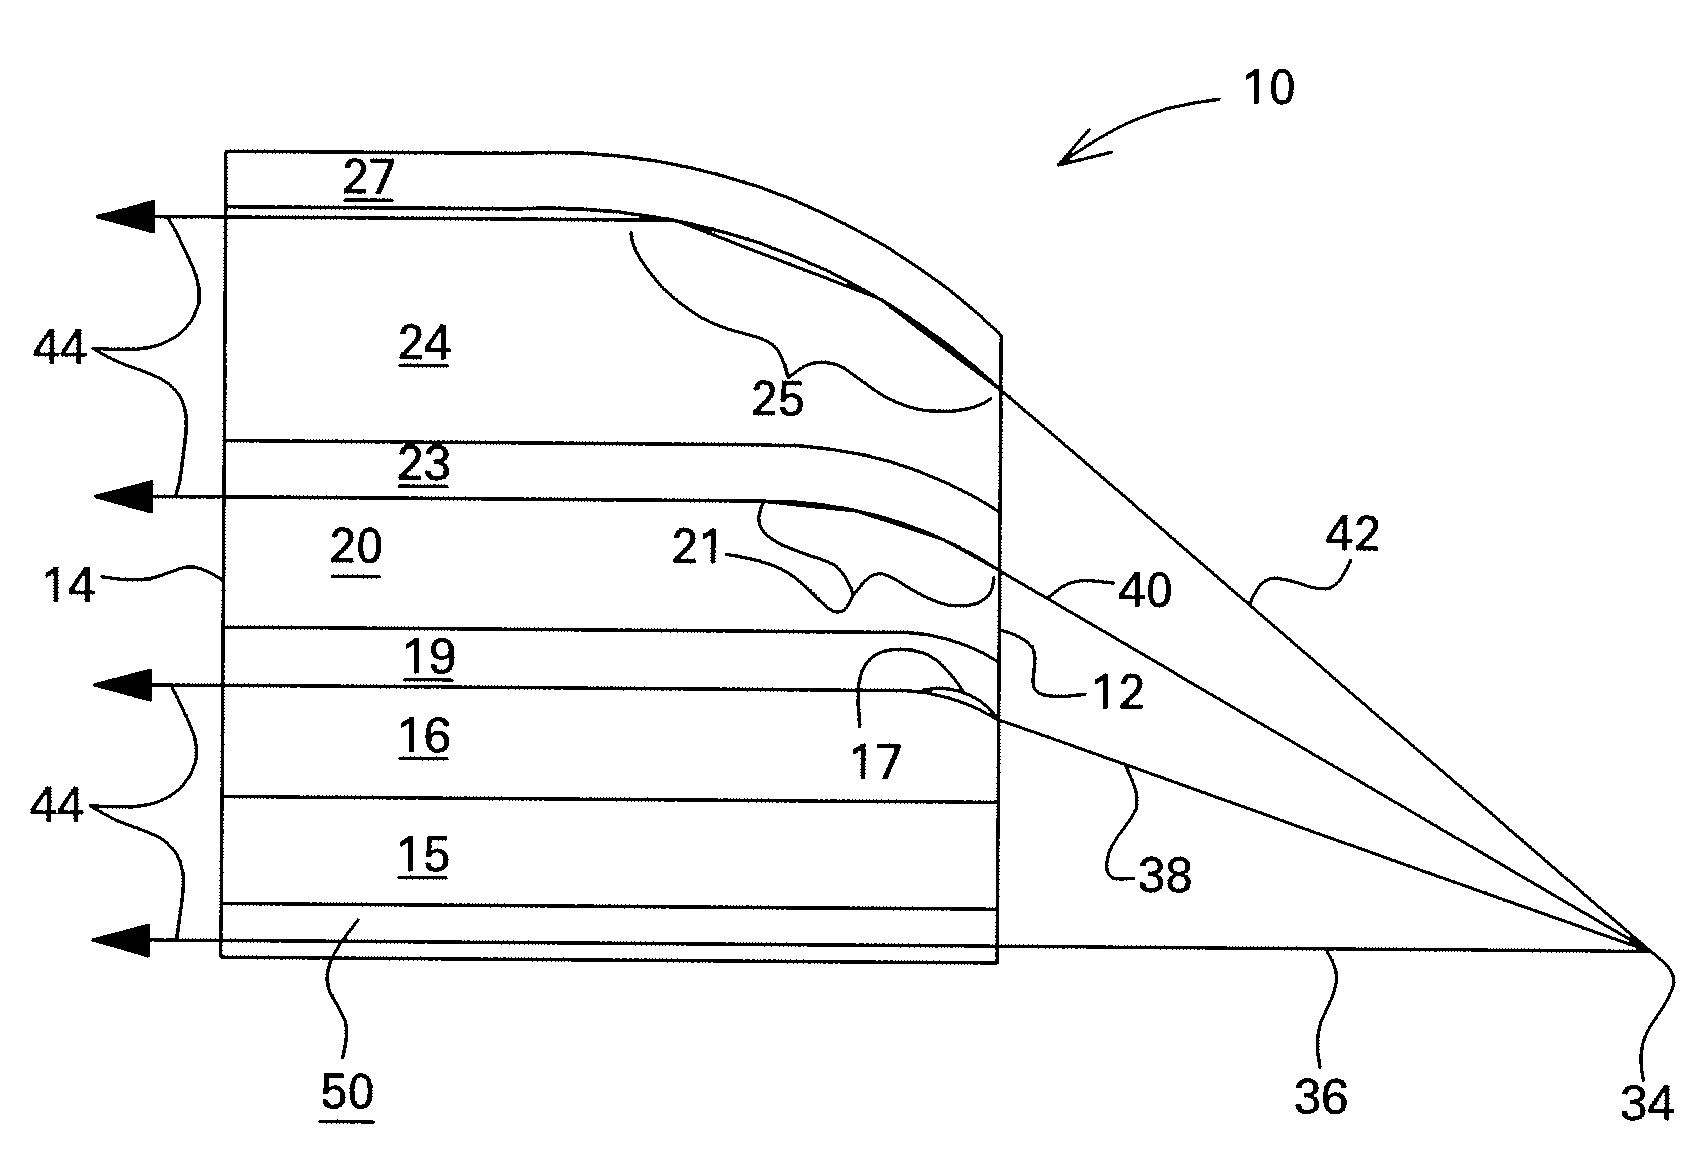 Multilayer optic device and system and method for making same